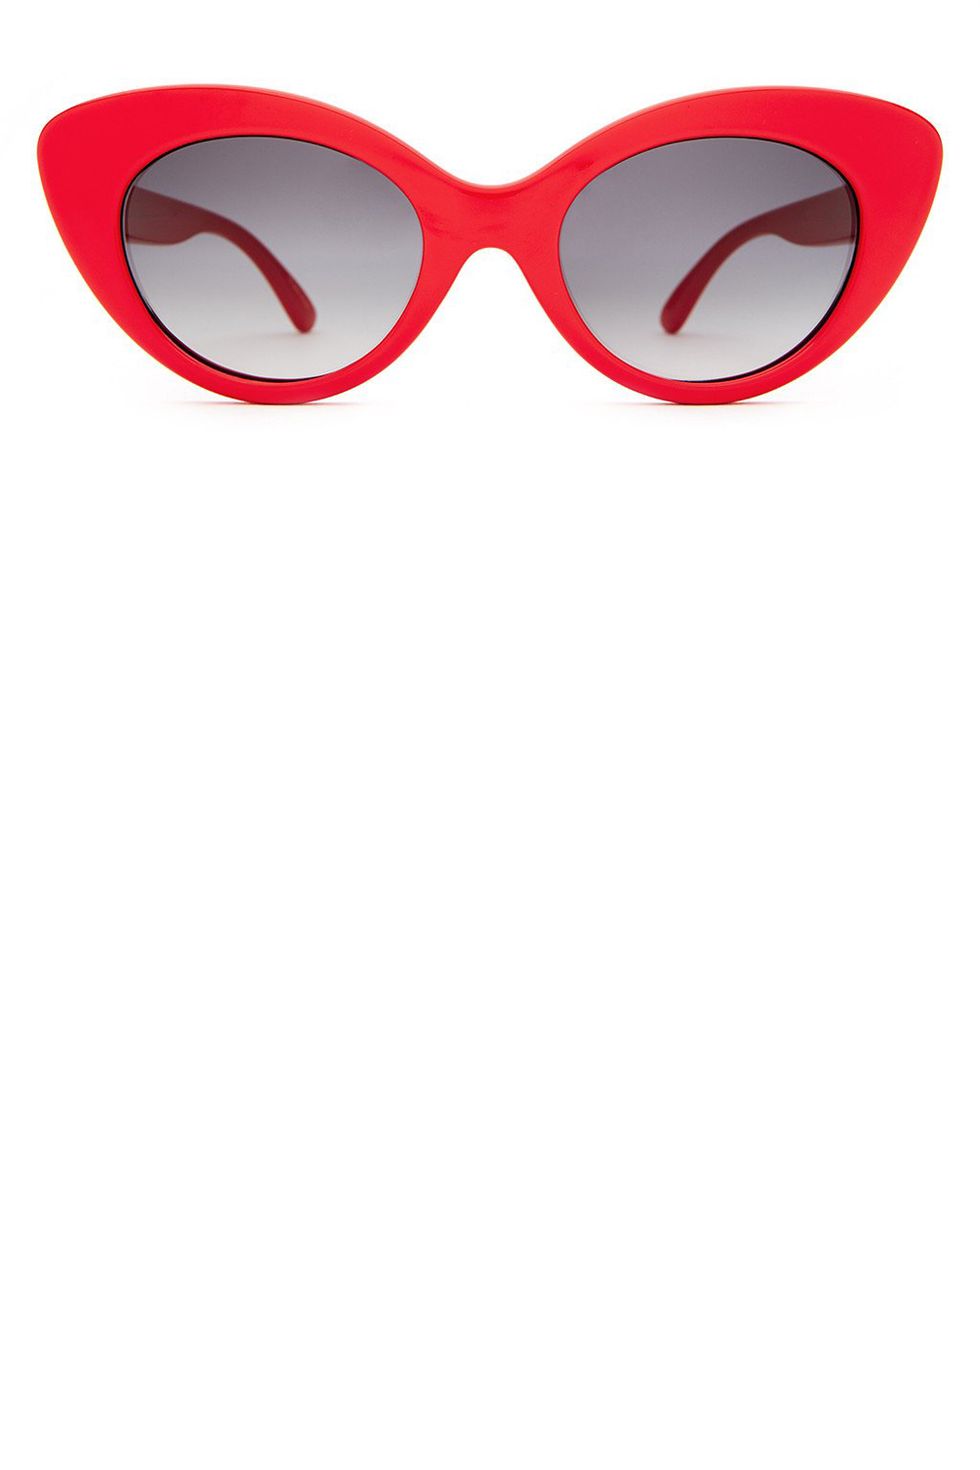 <p><strong>Crap Eyewear </strong>sunglasses, $58, <a href="http://www.crapeyewear.com/products/the-wild-gift-gloss-cherry-red-w-grey-gradient-cr-39-lenses-sunglasses" target="_blank">crapeyewear.com</a>. </p>